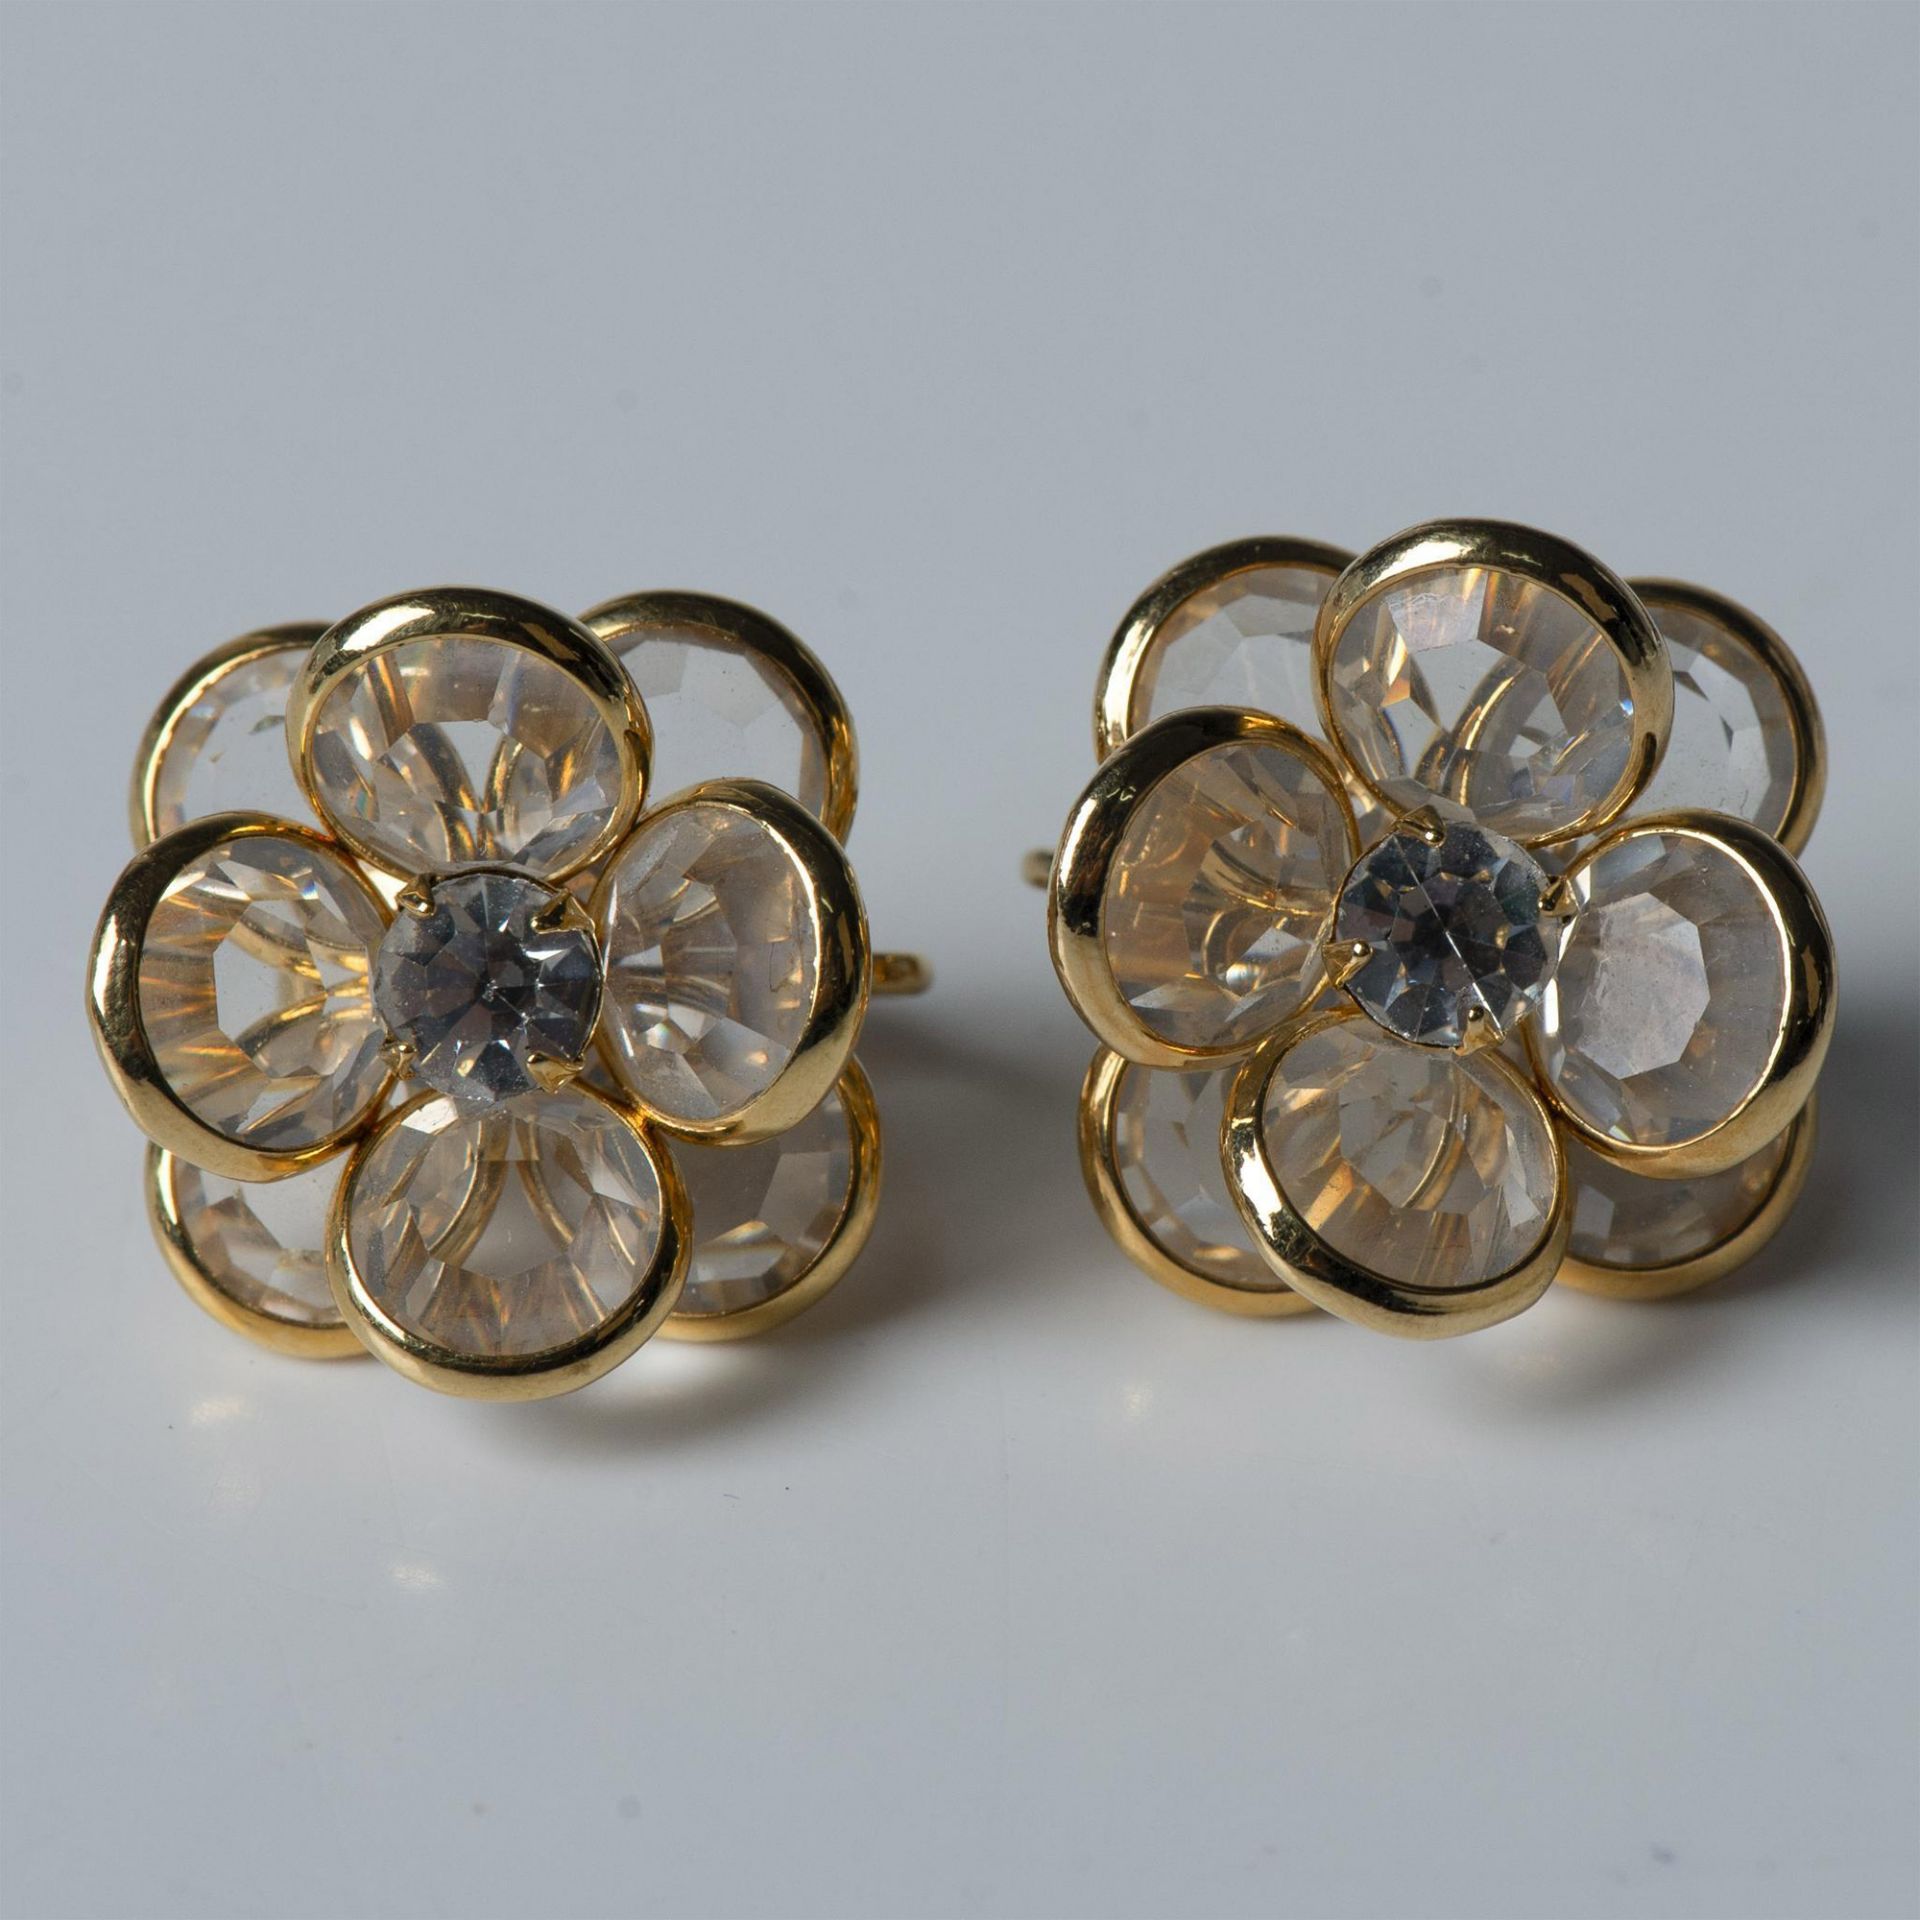 6 Pairs of Fabulous Cluster Clip-On Earrings - Image 5 of 8